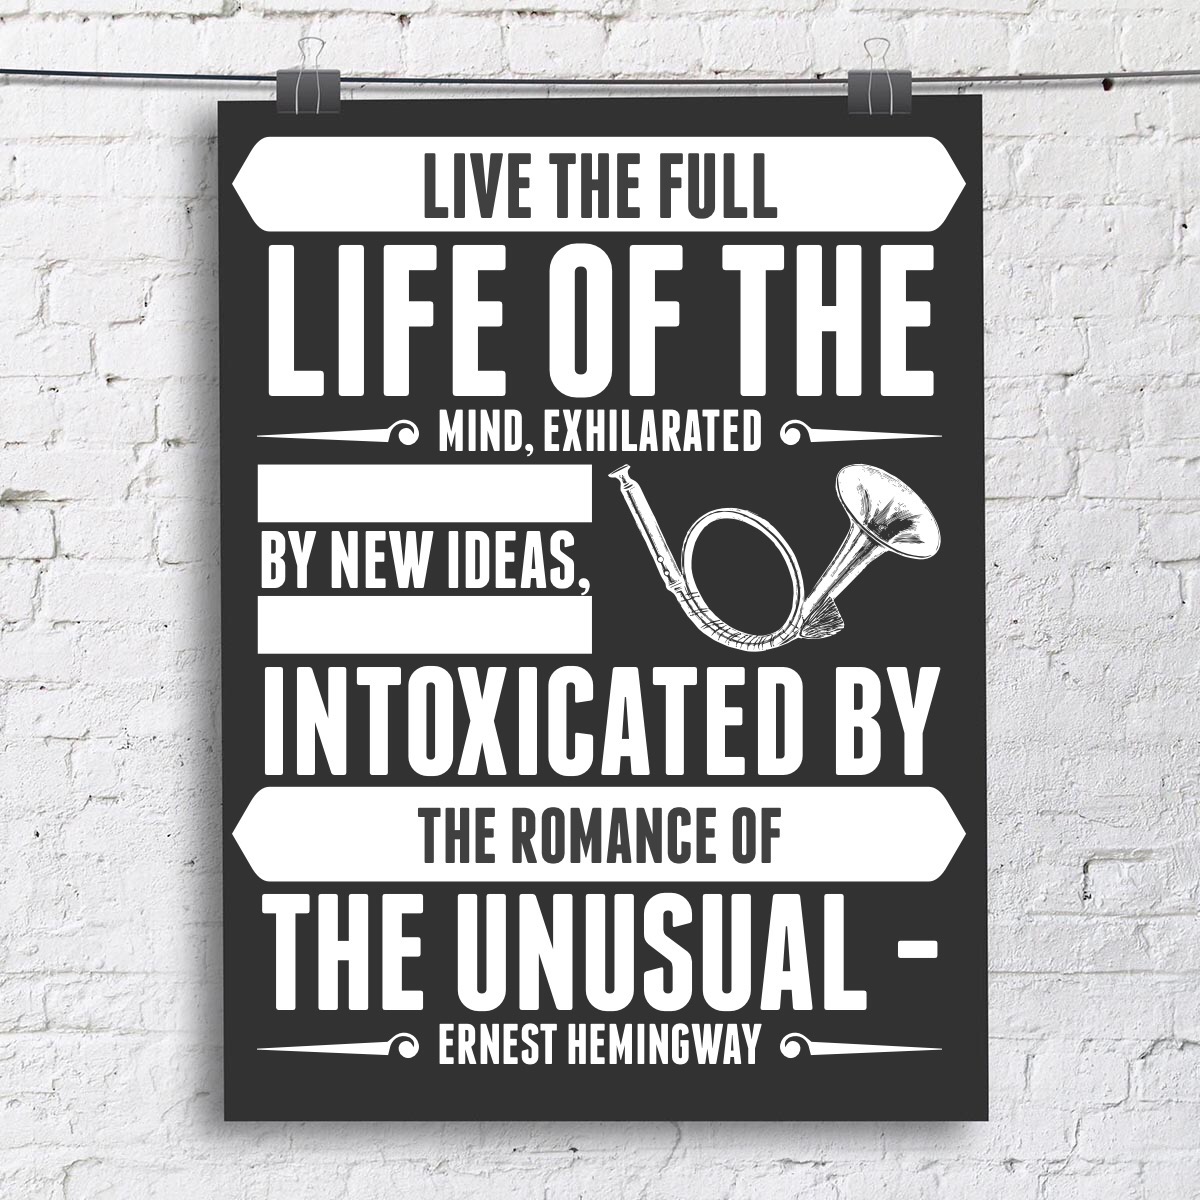 Literary Quotes For Teachers "Live the full life of the mind, exhilarated by new ideas, intoxicated by the romance of the unusual" - Ernest Hemingway